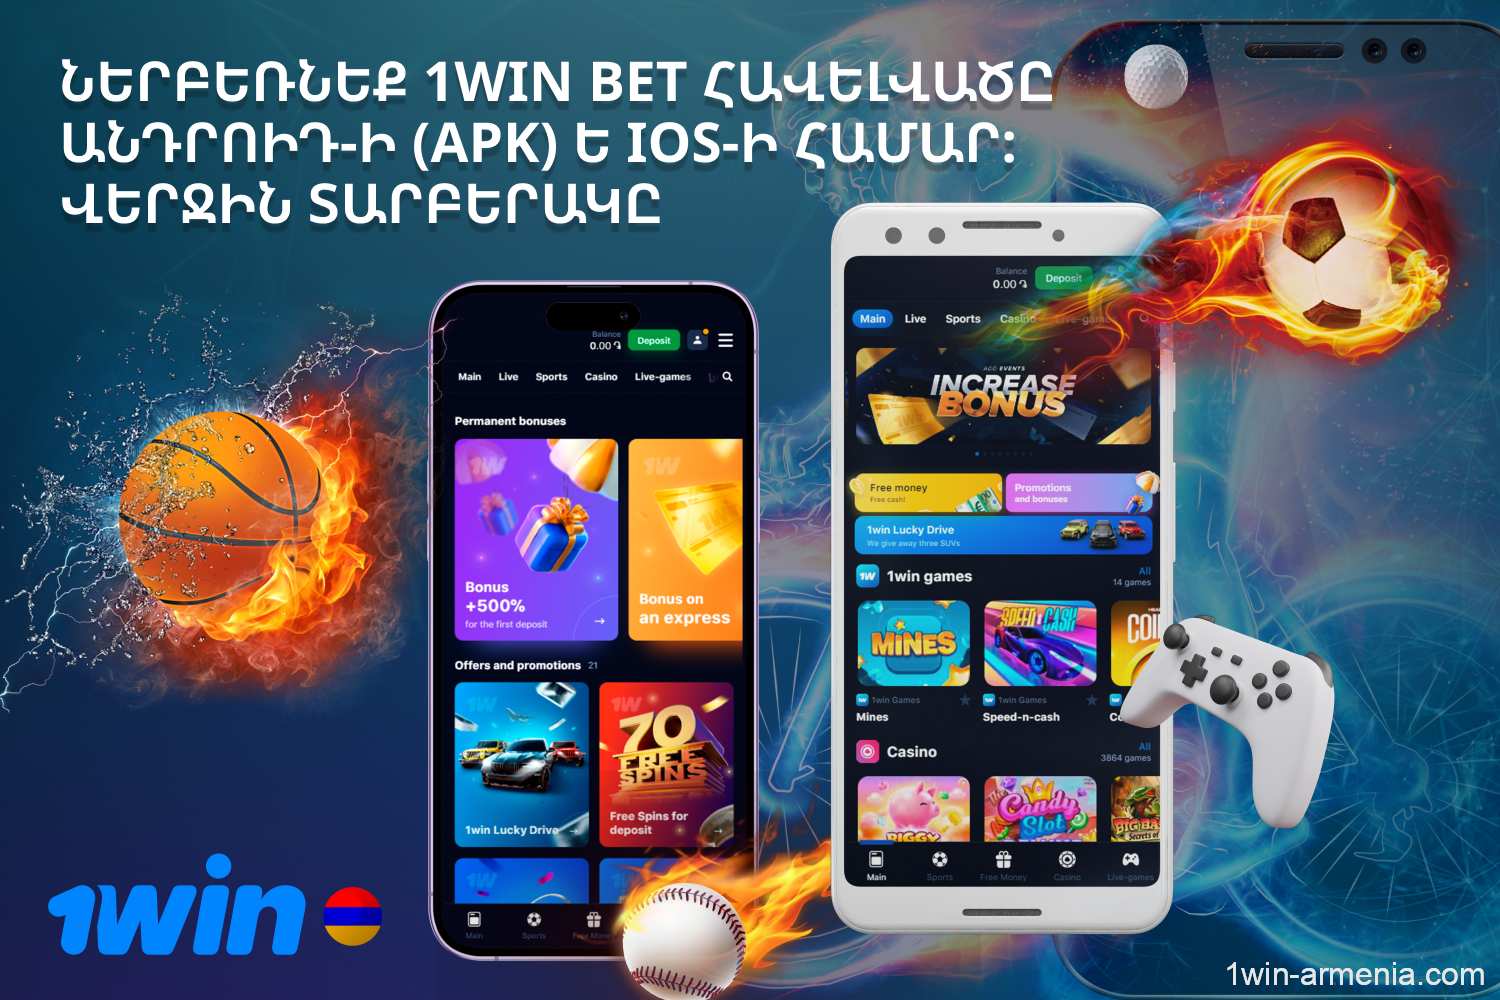 In the 1win mobile application, users from Armenia can bet on sports, play in the casino and take advantage of promotional offers